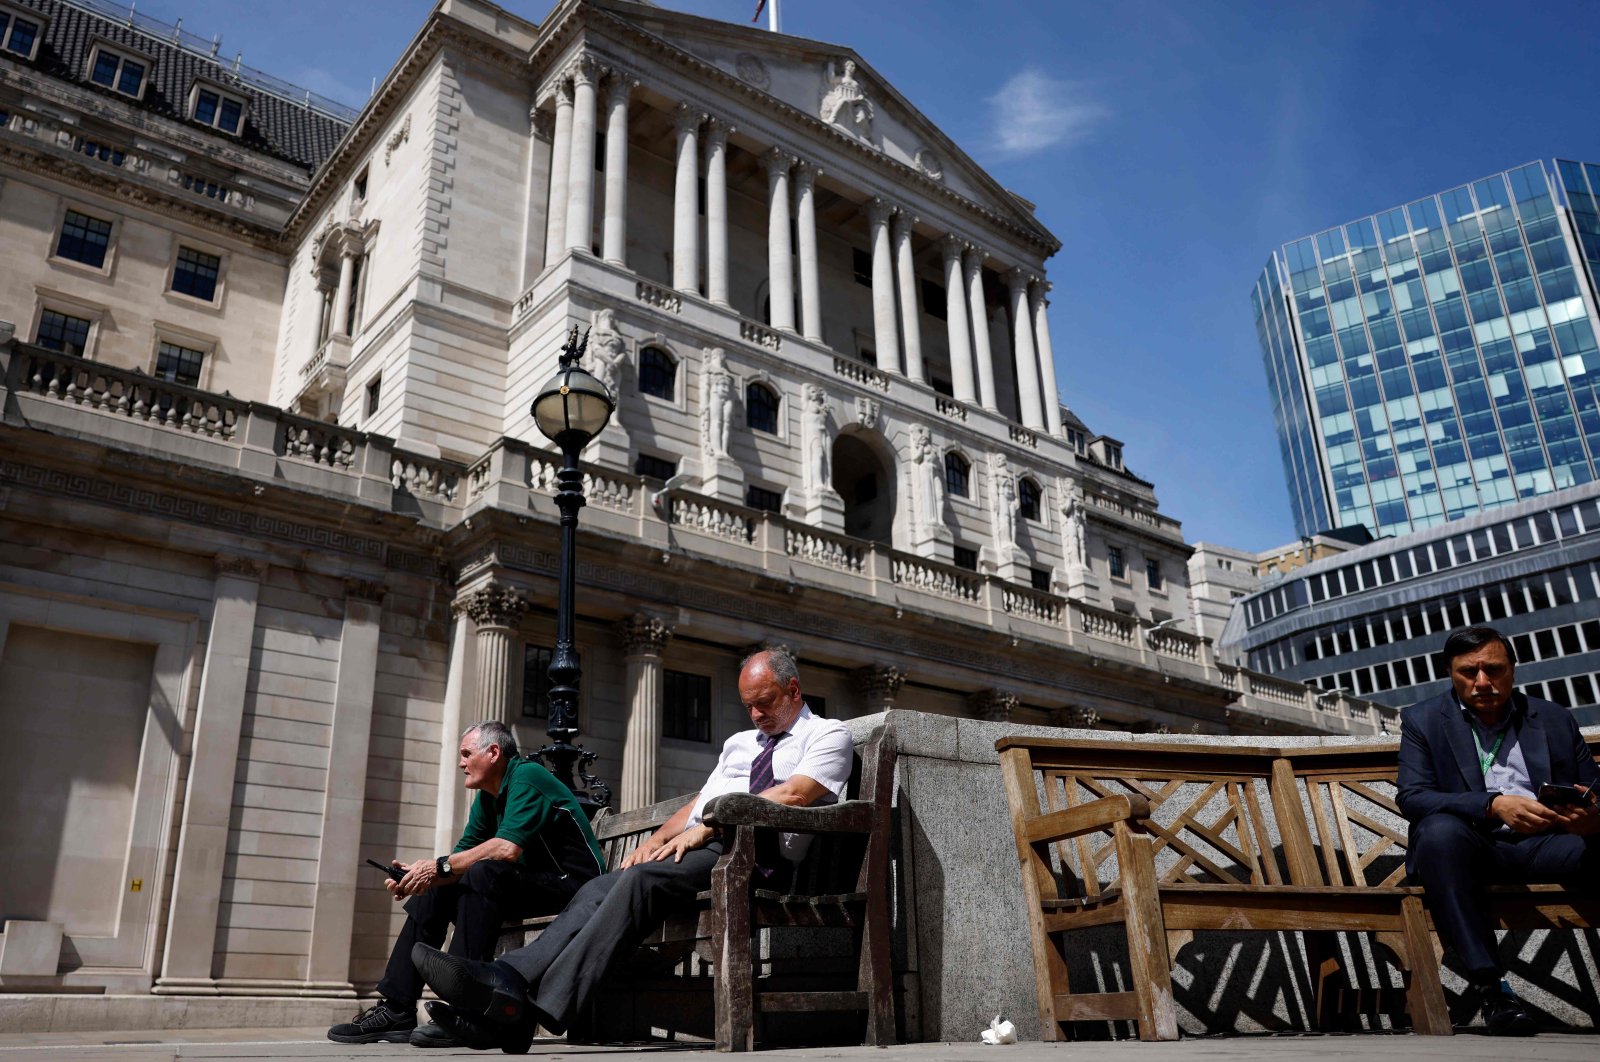 Members of the public take a break in the sunshine outside The Bank of England in London, Britain, June 16, 2022. (AFP Photo)